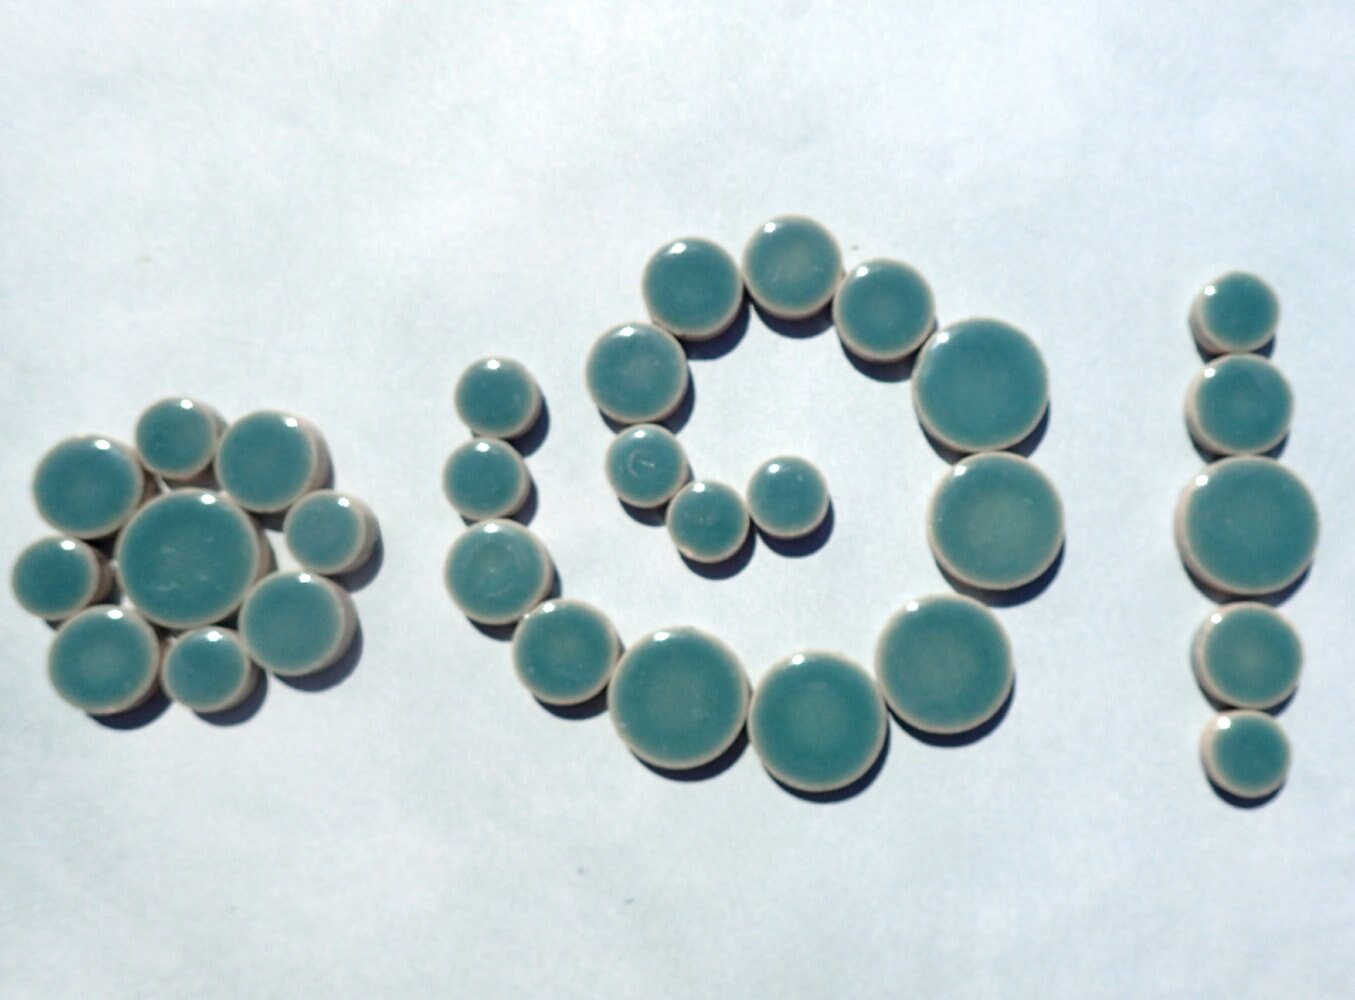 Deep Sea Green Circles Mosaic Tiles - 50g Ceramic in Mix of 3 Sizes 1/2" and 3/4" and 5/8" in Phthalo Green